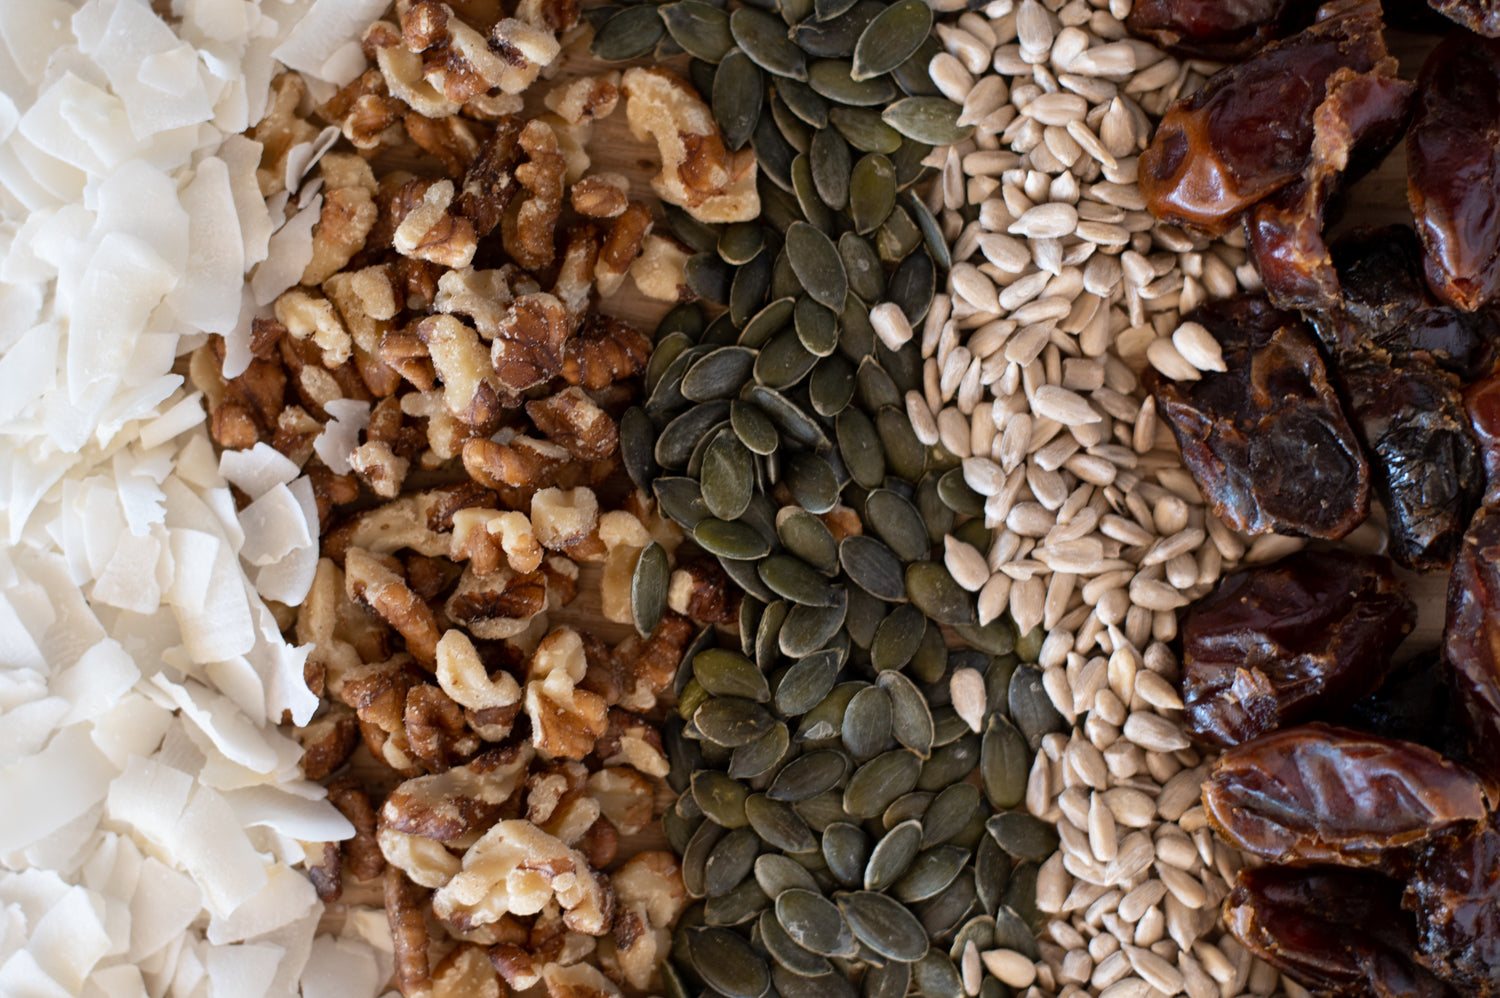 A selection of ingredients, including coconut, walnuts, sunflower seeds, pumpkin seeds and dates